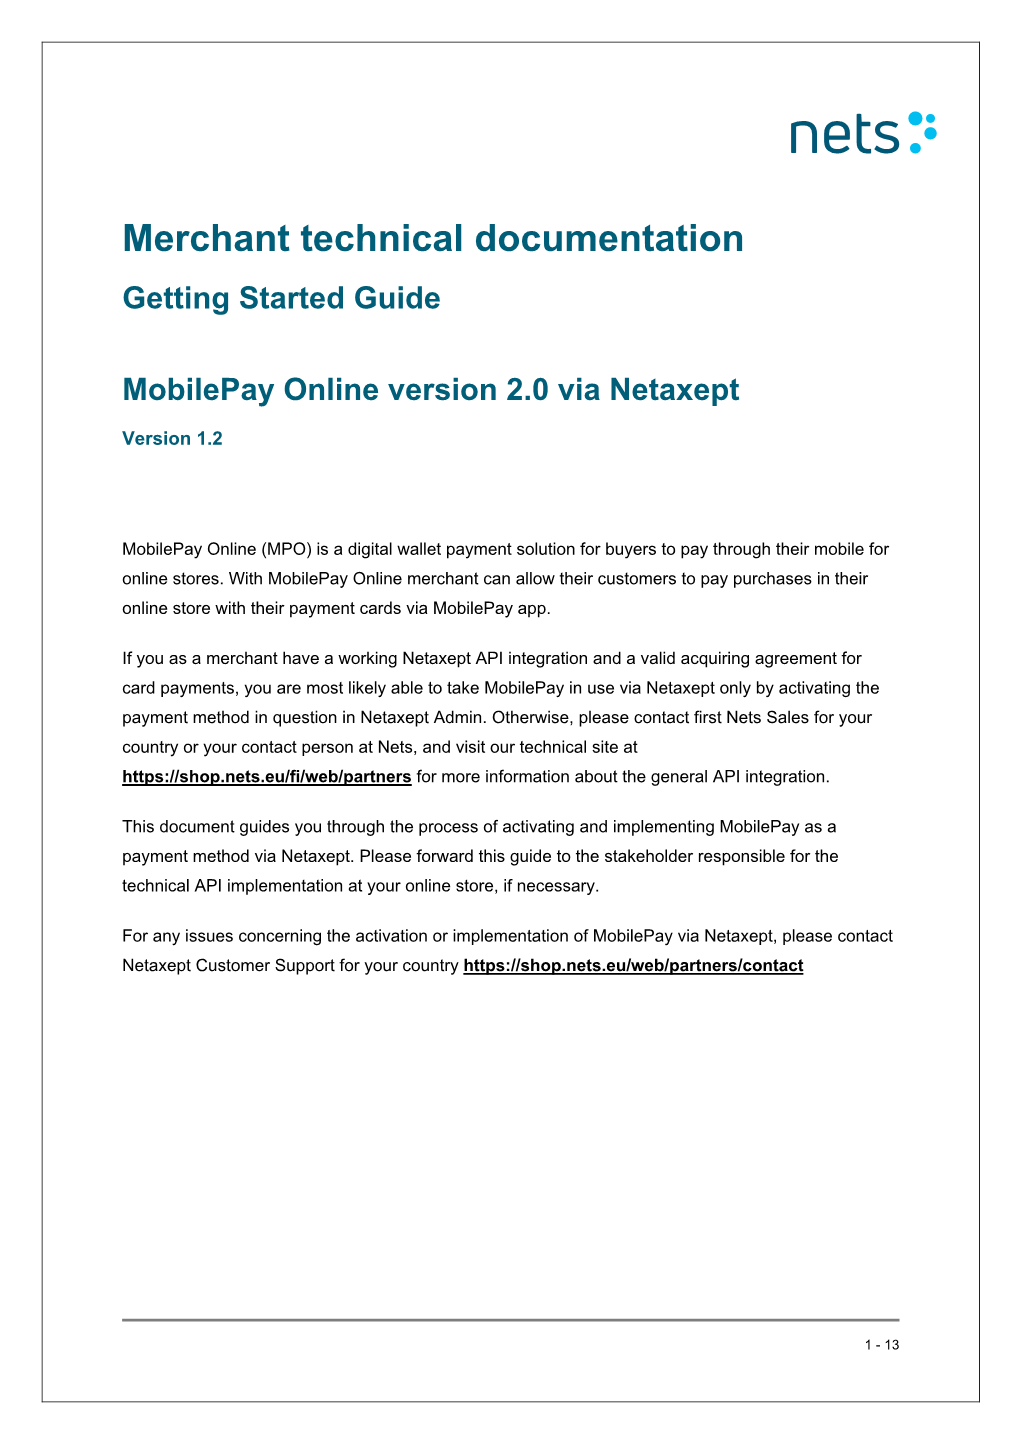 Merchant Technical Documentation Getting Started Guide